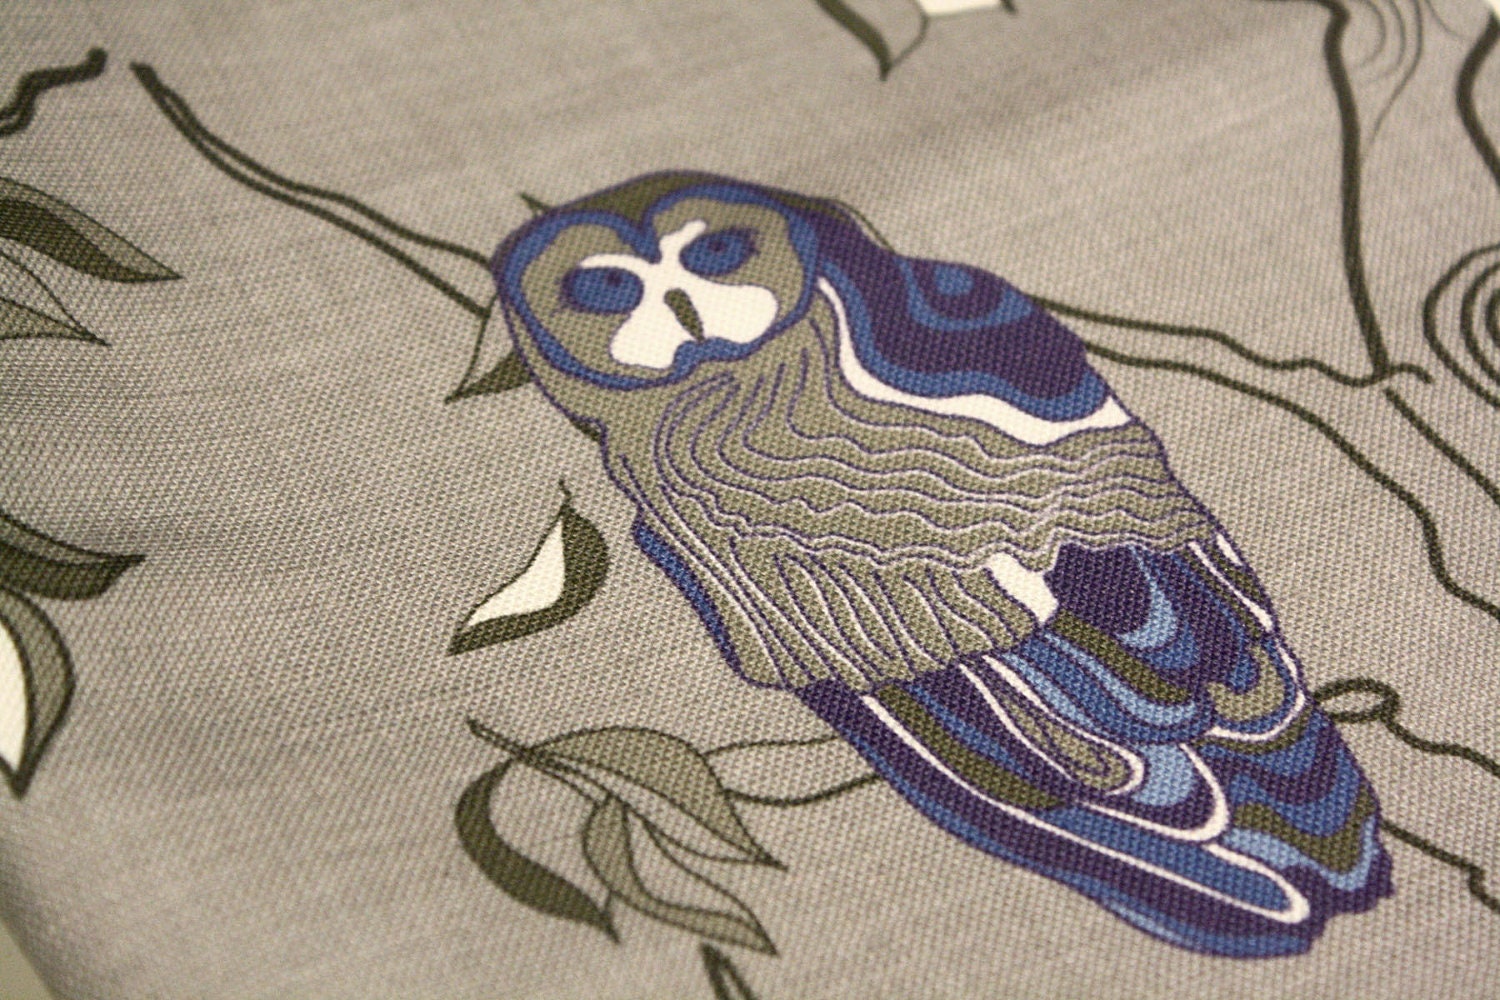 Medium Weight Fabric with owls - custom design  - Greys, blues, white - ships 10 days after order - NewMomDesigns